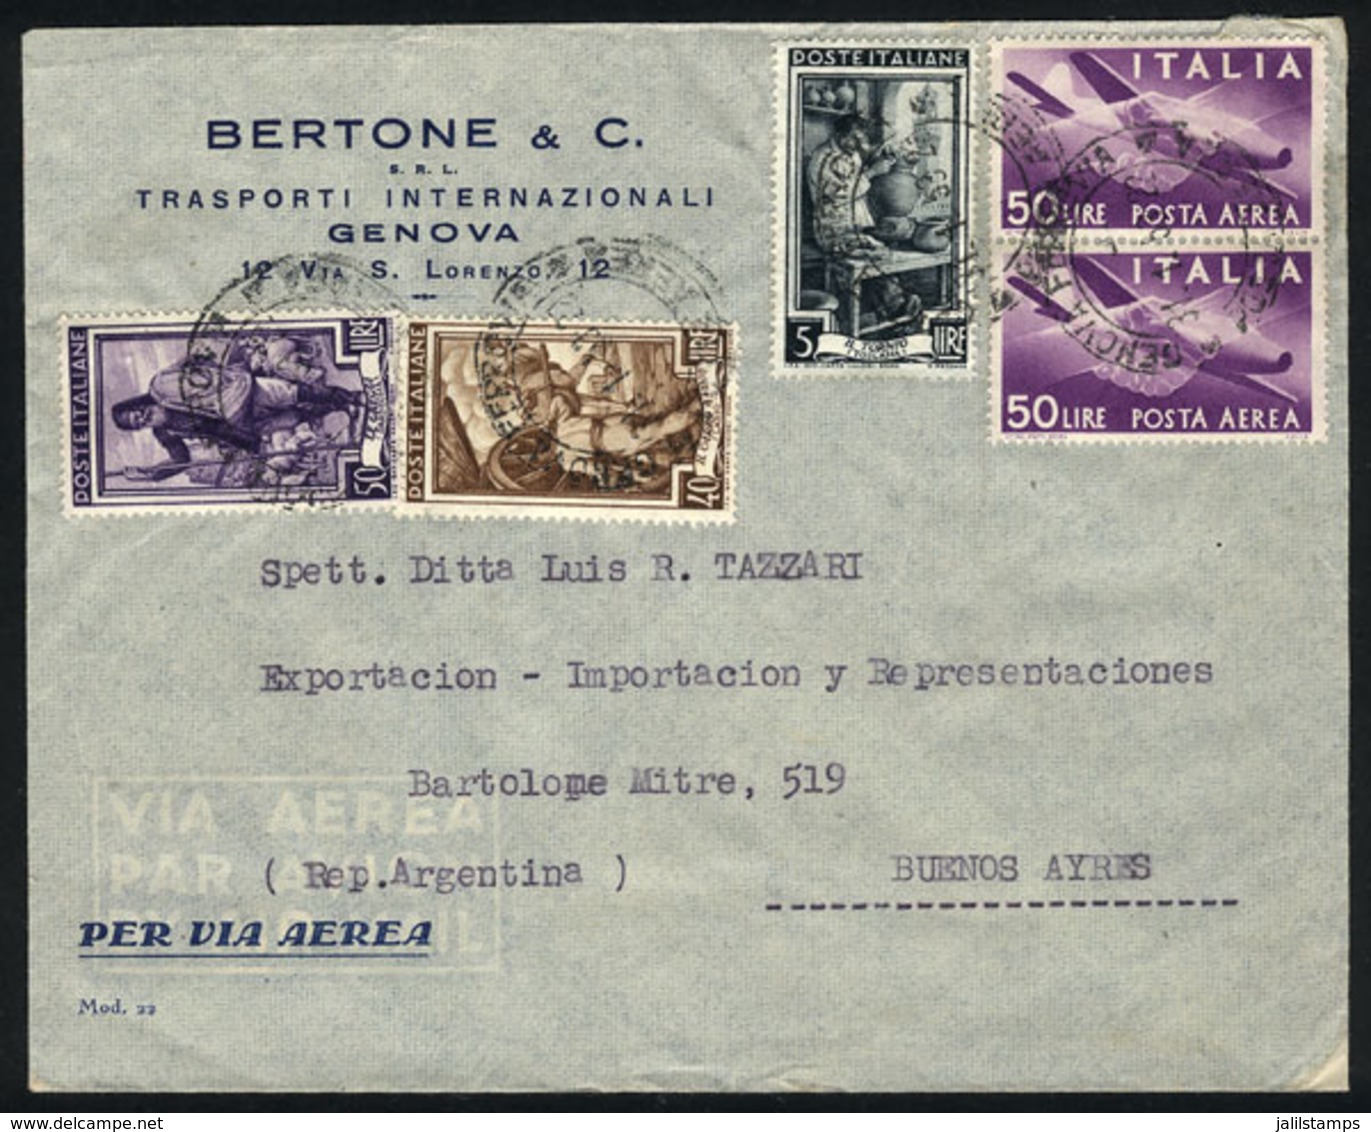 ITALY: Airmail Cover Sent From Genova To Argentina On 31/JA/1953, With Nice Postage Of 195L., VF Quality! - Ohne Zuordnung